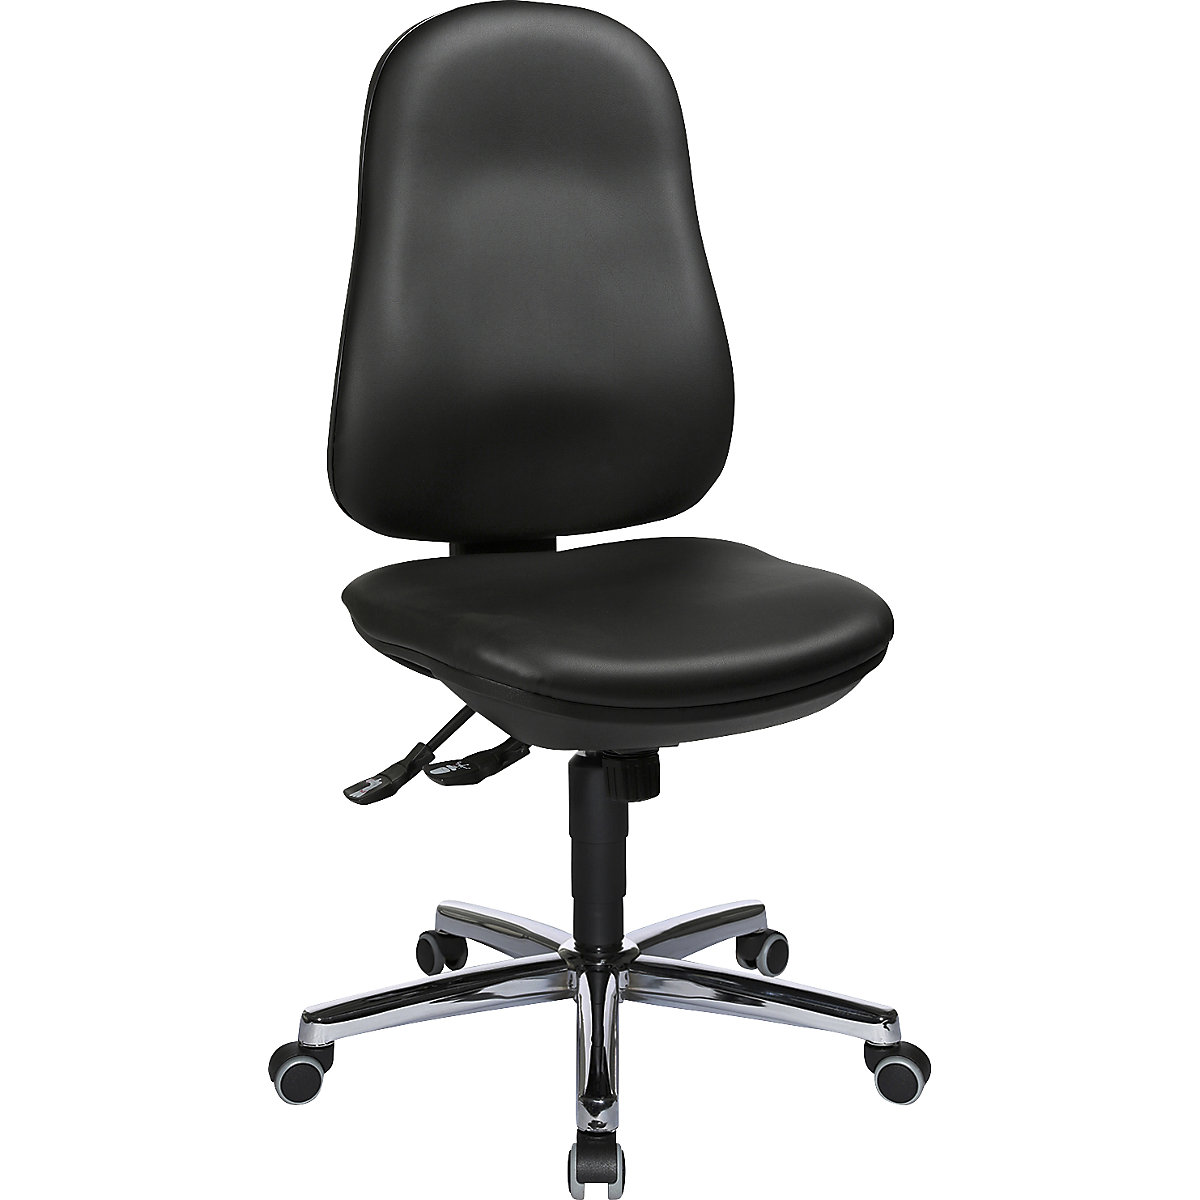 SUPPORT SY swivel chair - Topstar